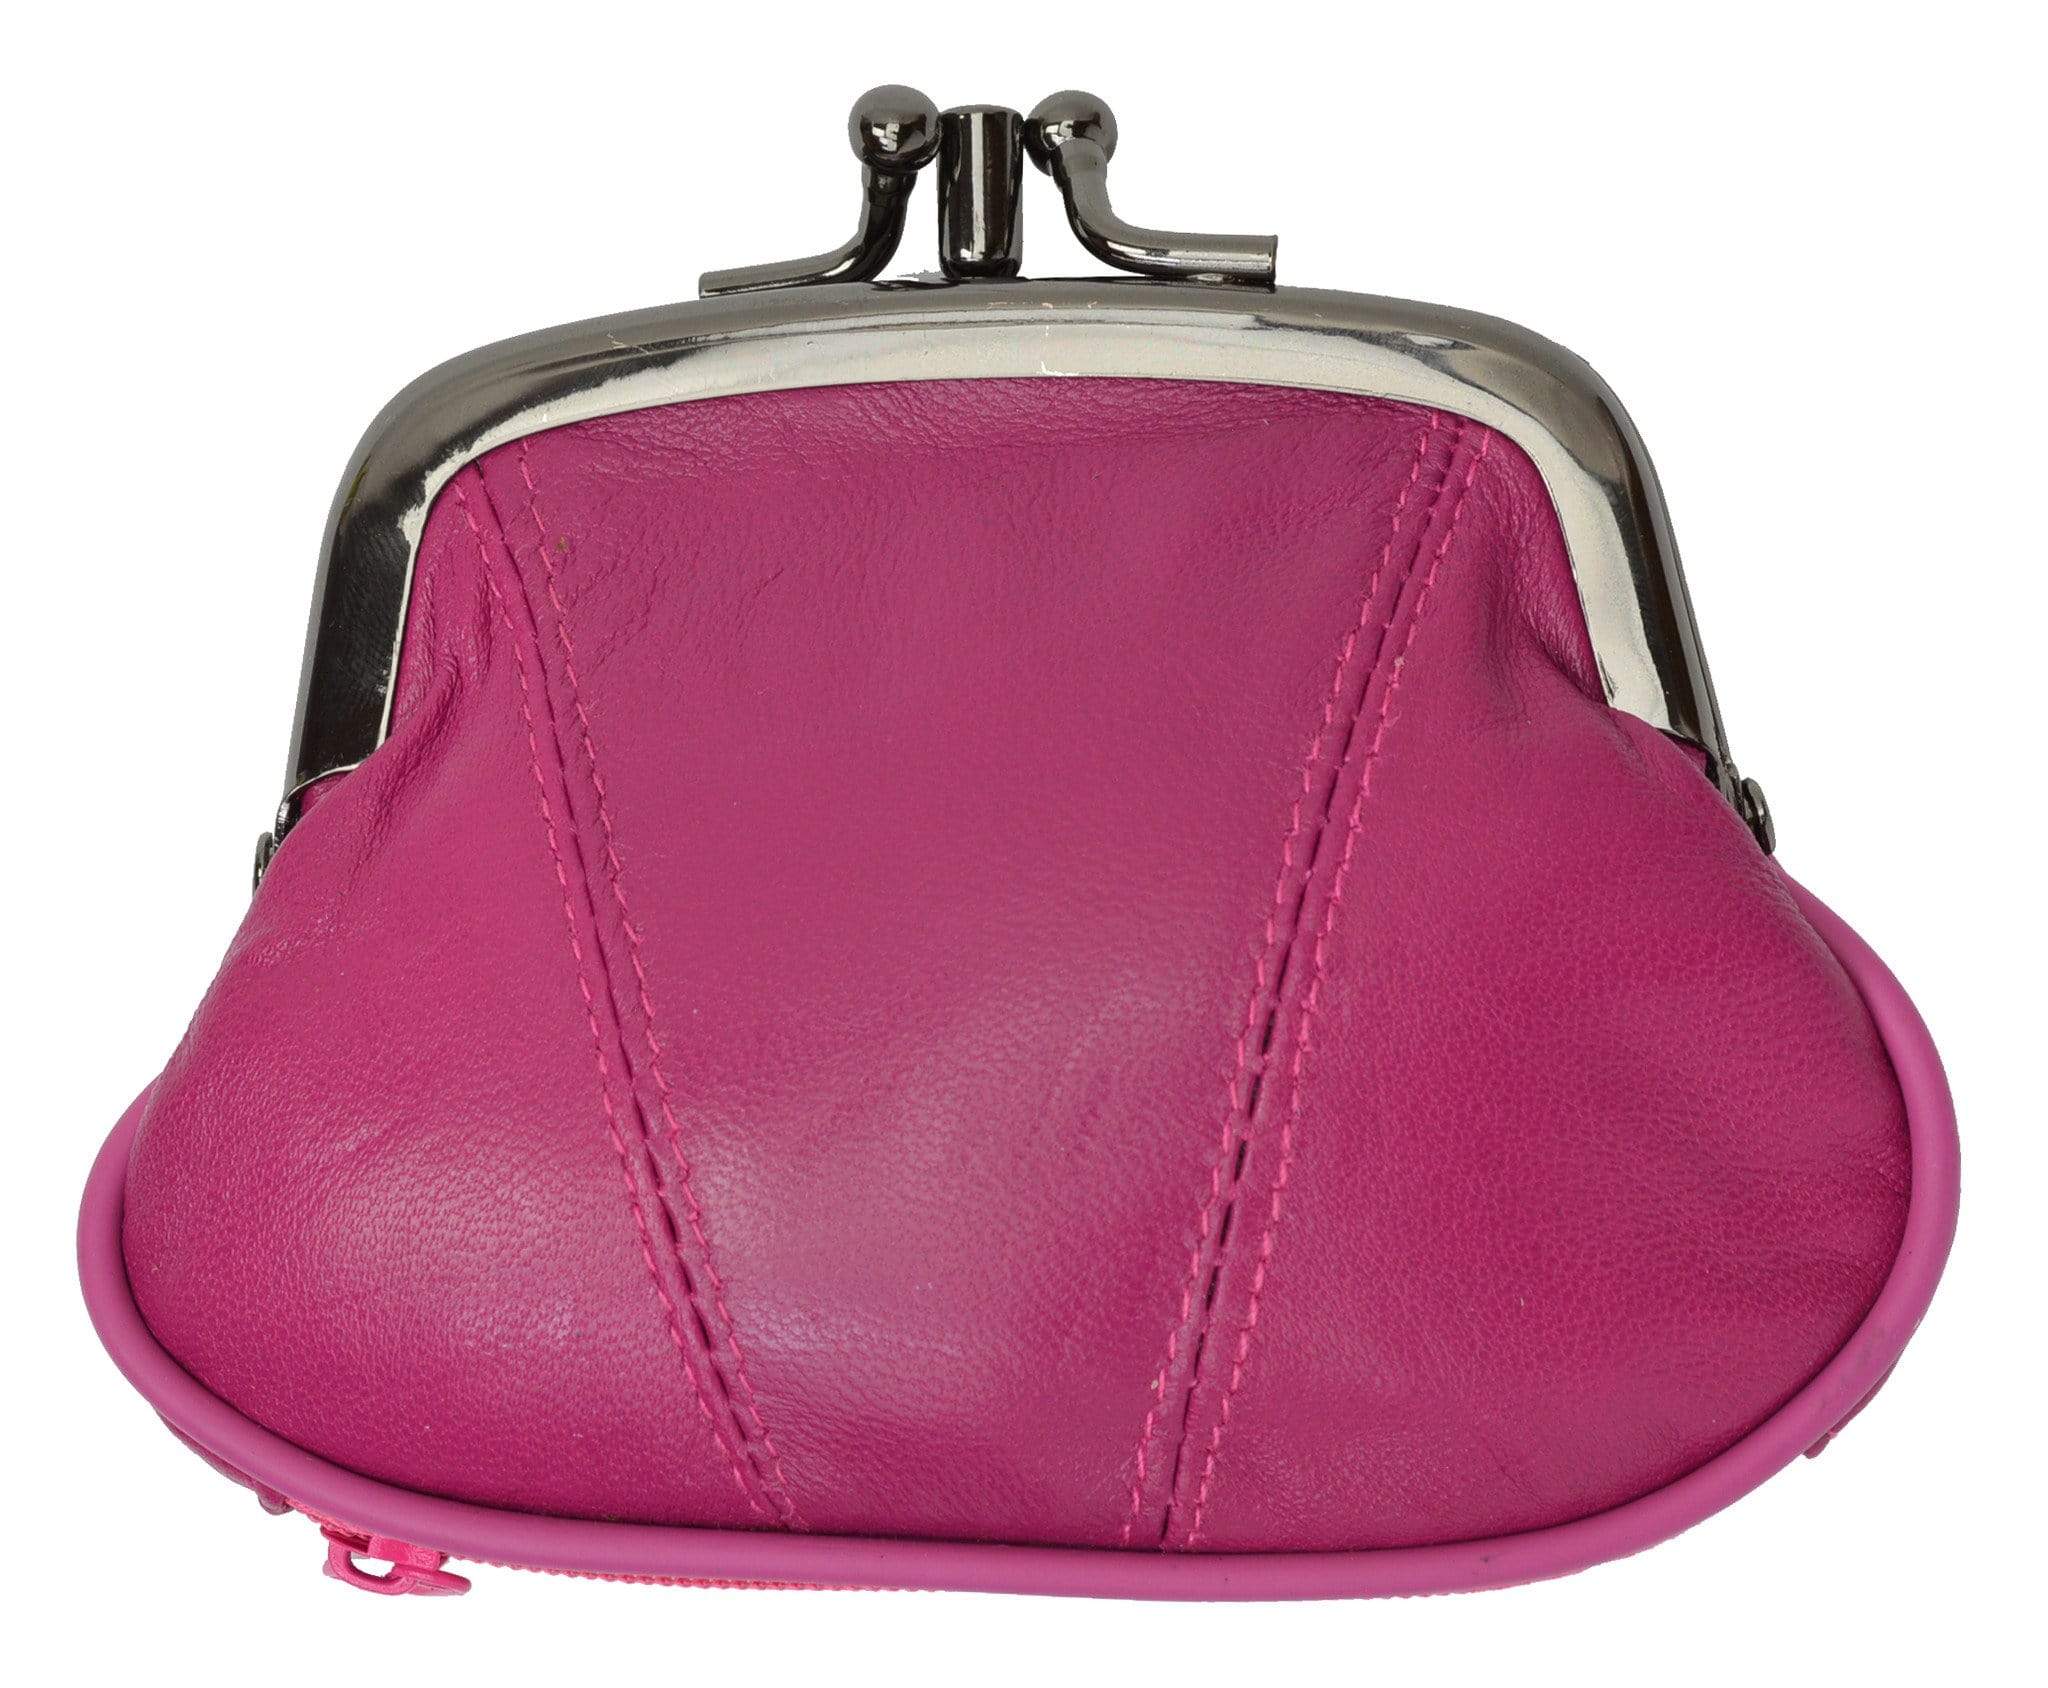 Leather Squeeze Coin Pouch Purse in Blush Pink Metallic